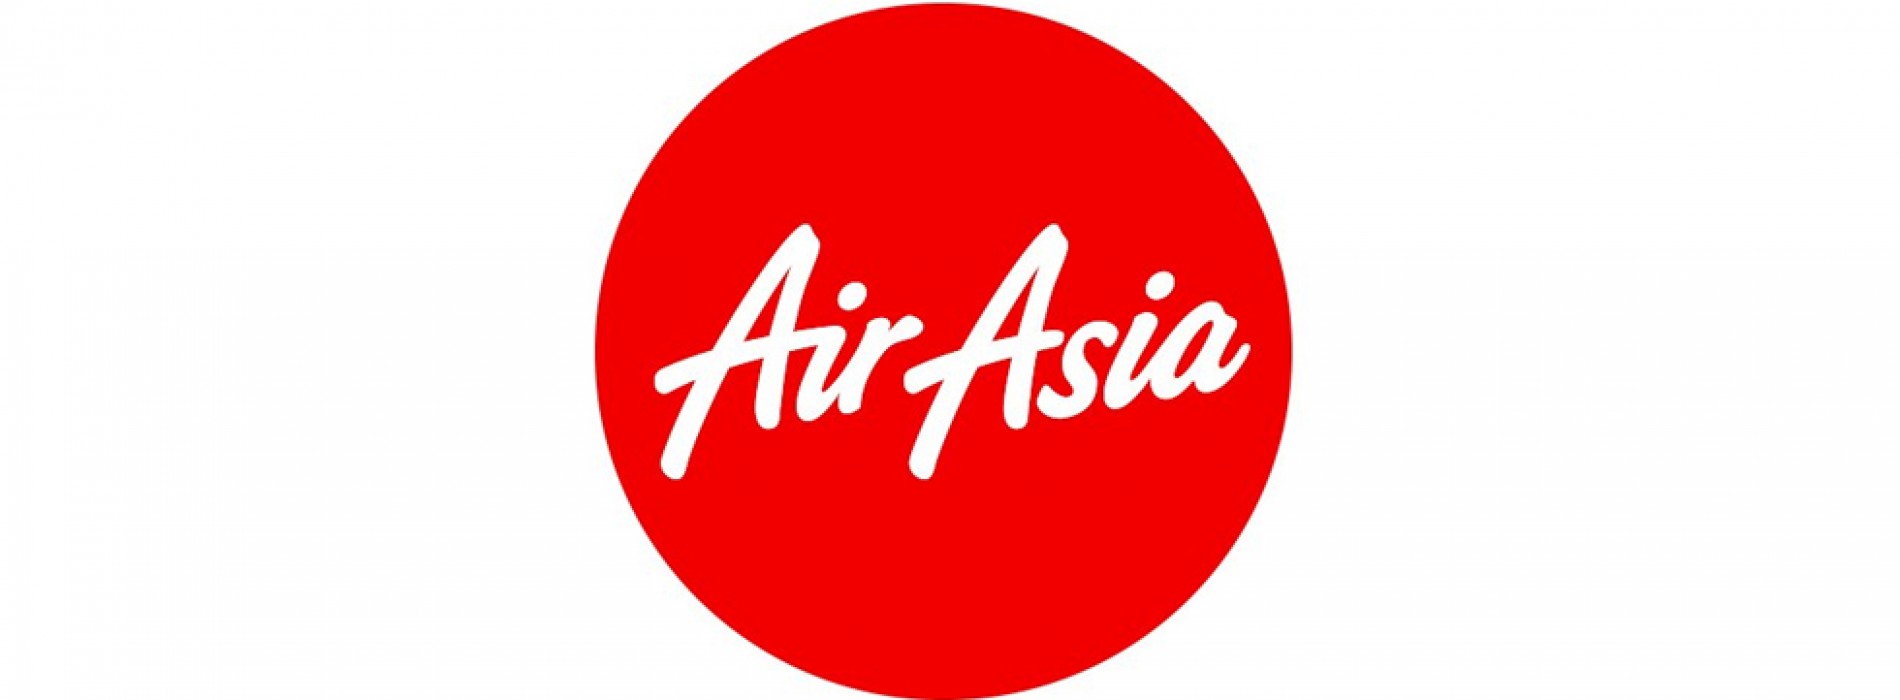 AirAsia India to add 20 aircraft and start international operations by mid 2018